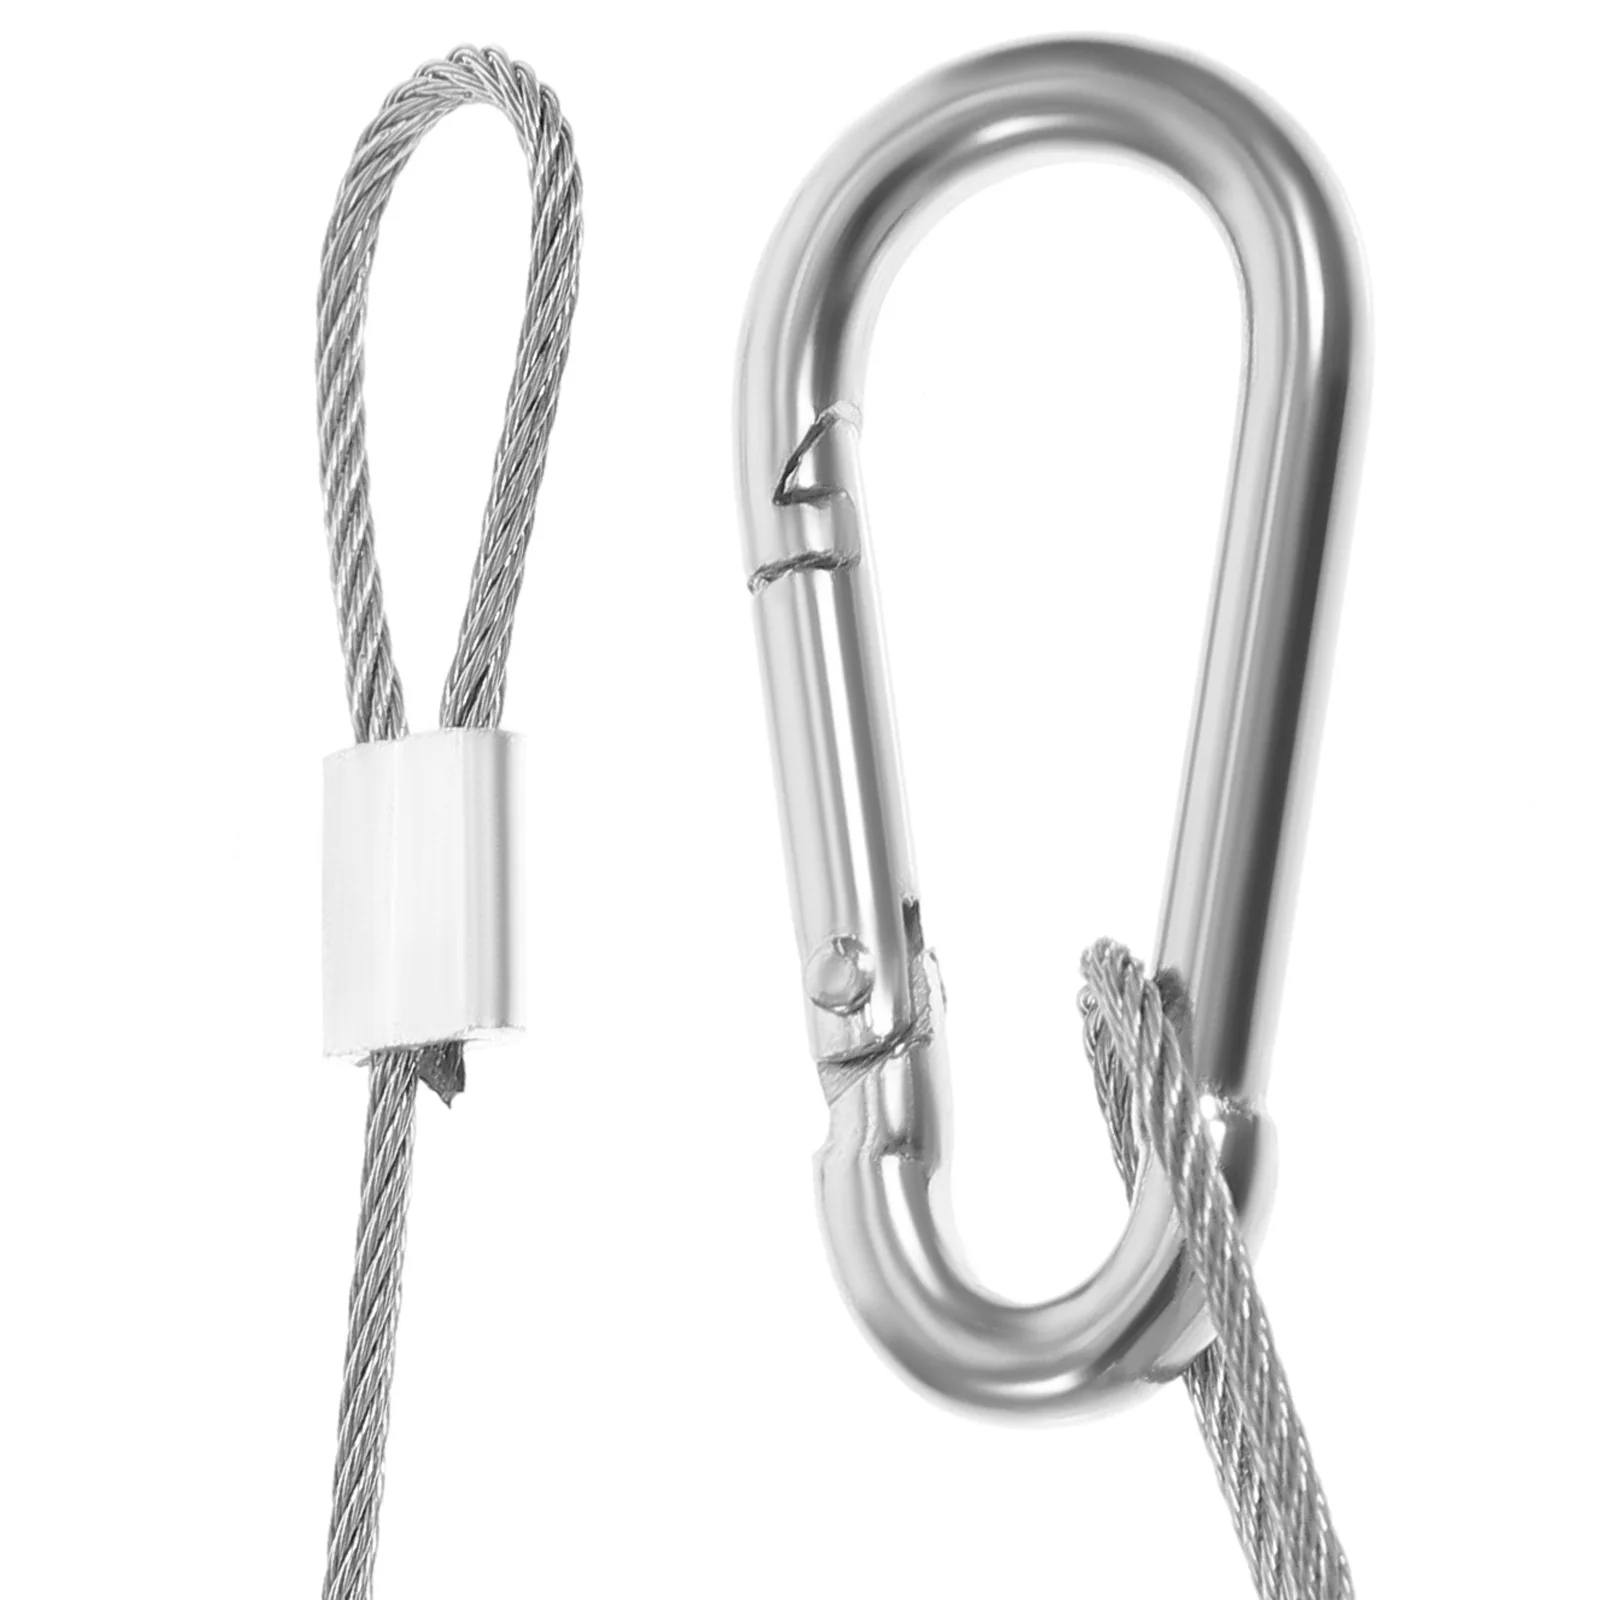 Wire Rope Lock Carabiner Stainless Steel Steel Safety Rope Heavy Duty Bike Lock Cable For Stage Light Stainless Steel Safety